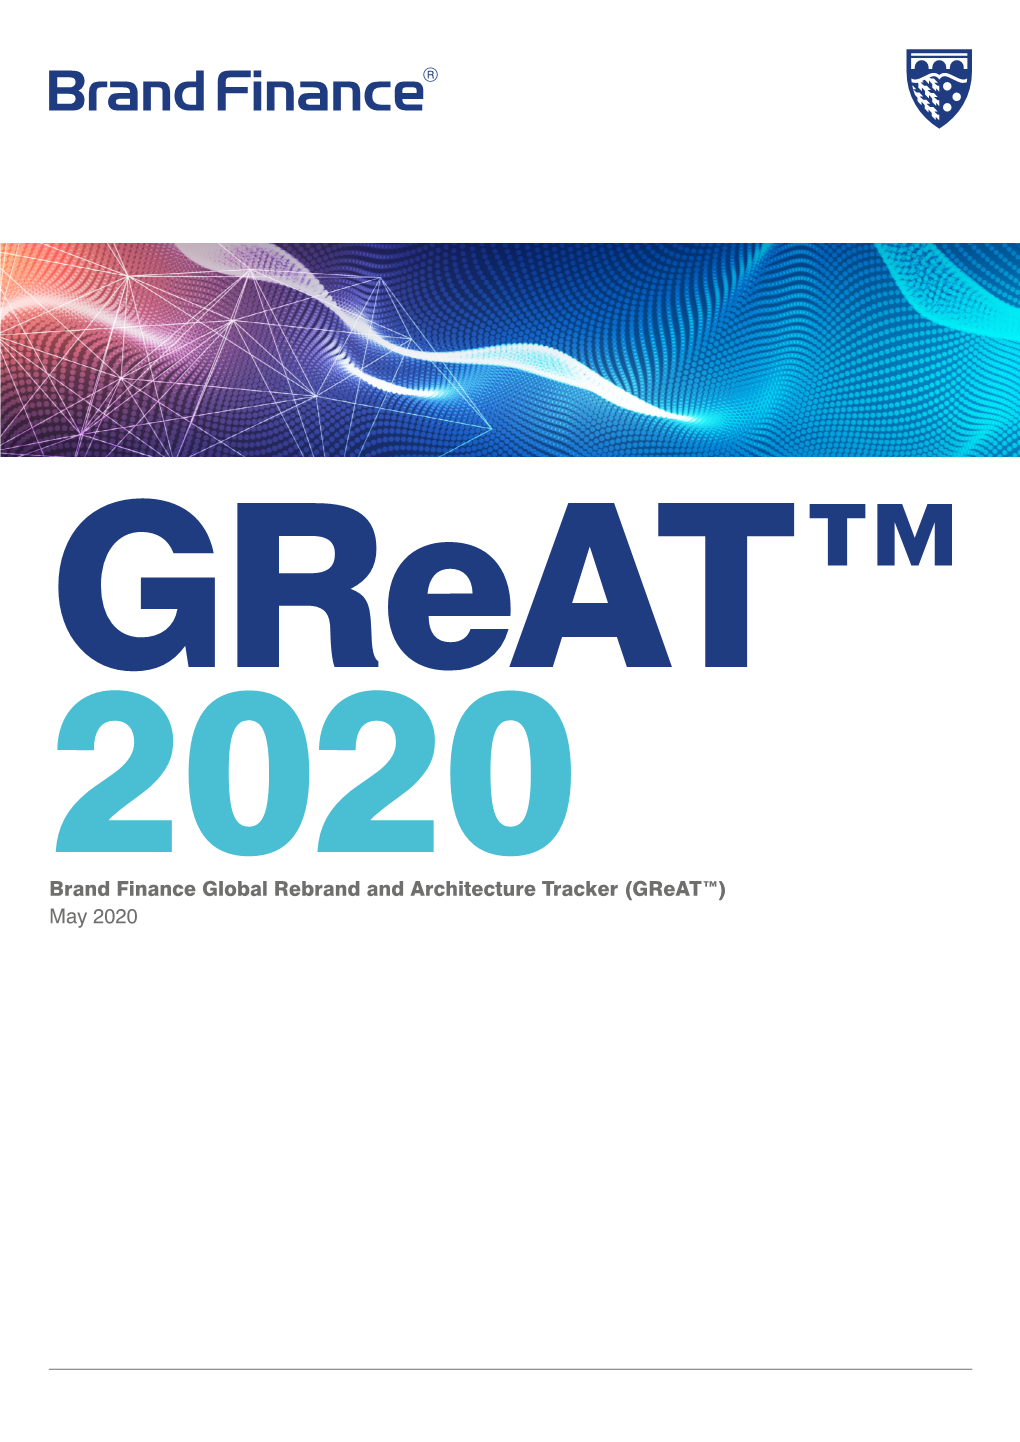 Brand Finance Global Rebrand and Architecture Tracker (Great™) May 2020 Contents